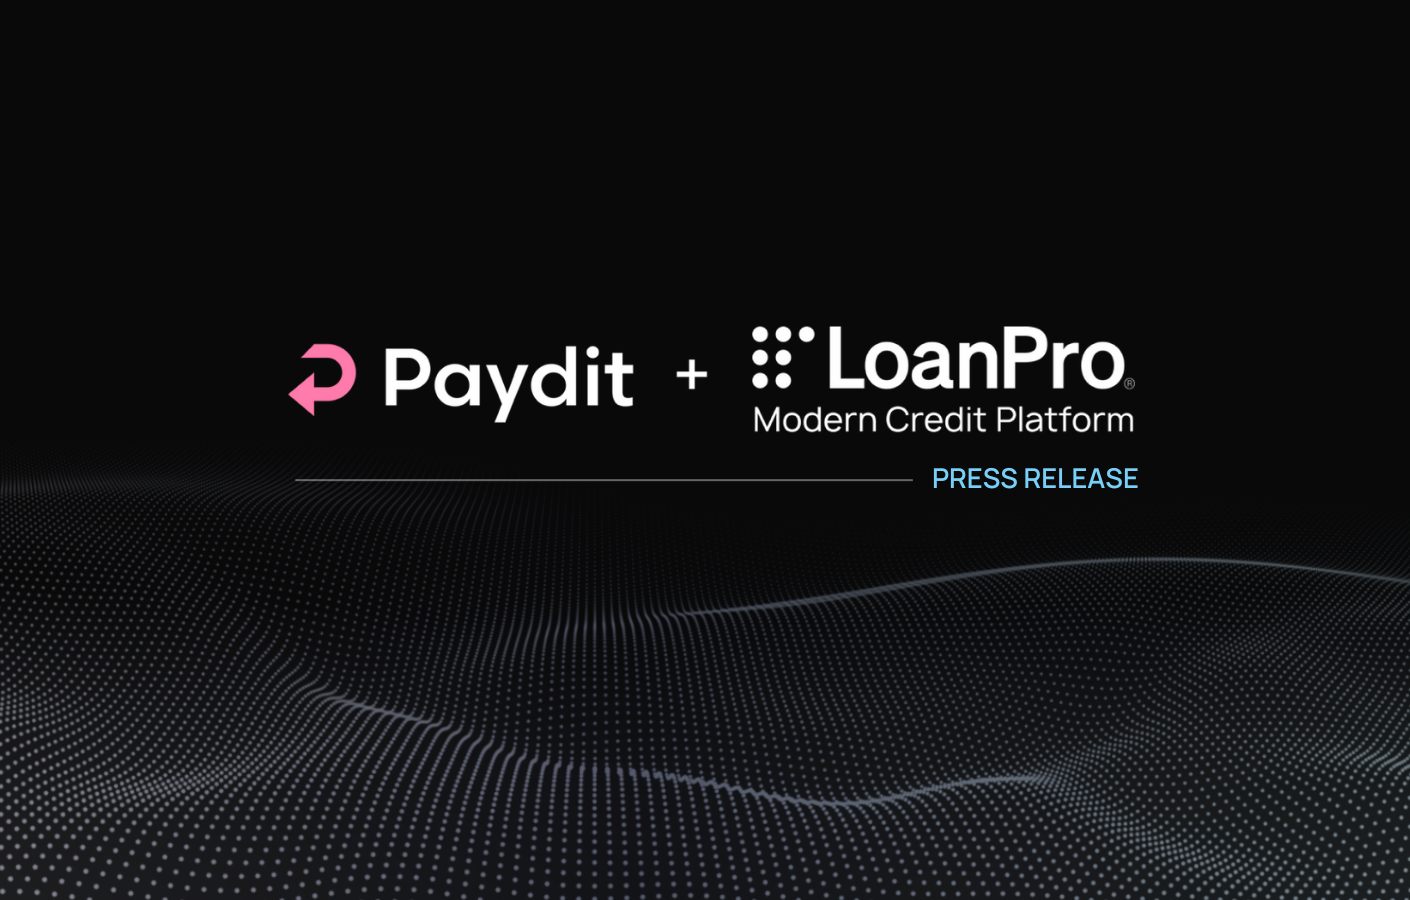 Paydit and LoanPro Announce Strategic Partnership to Streamline Collections and Boost Recovery Rates for Lenders